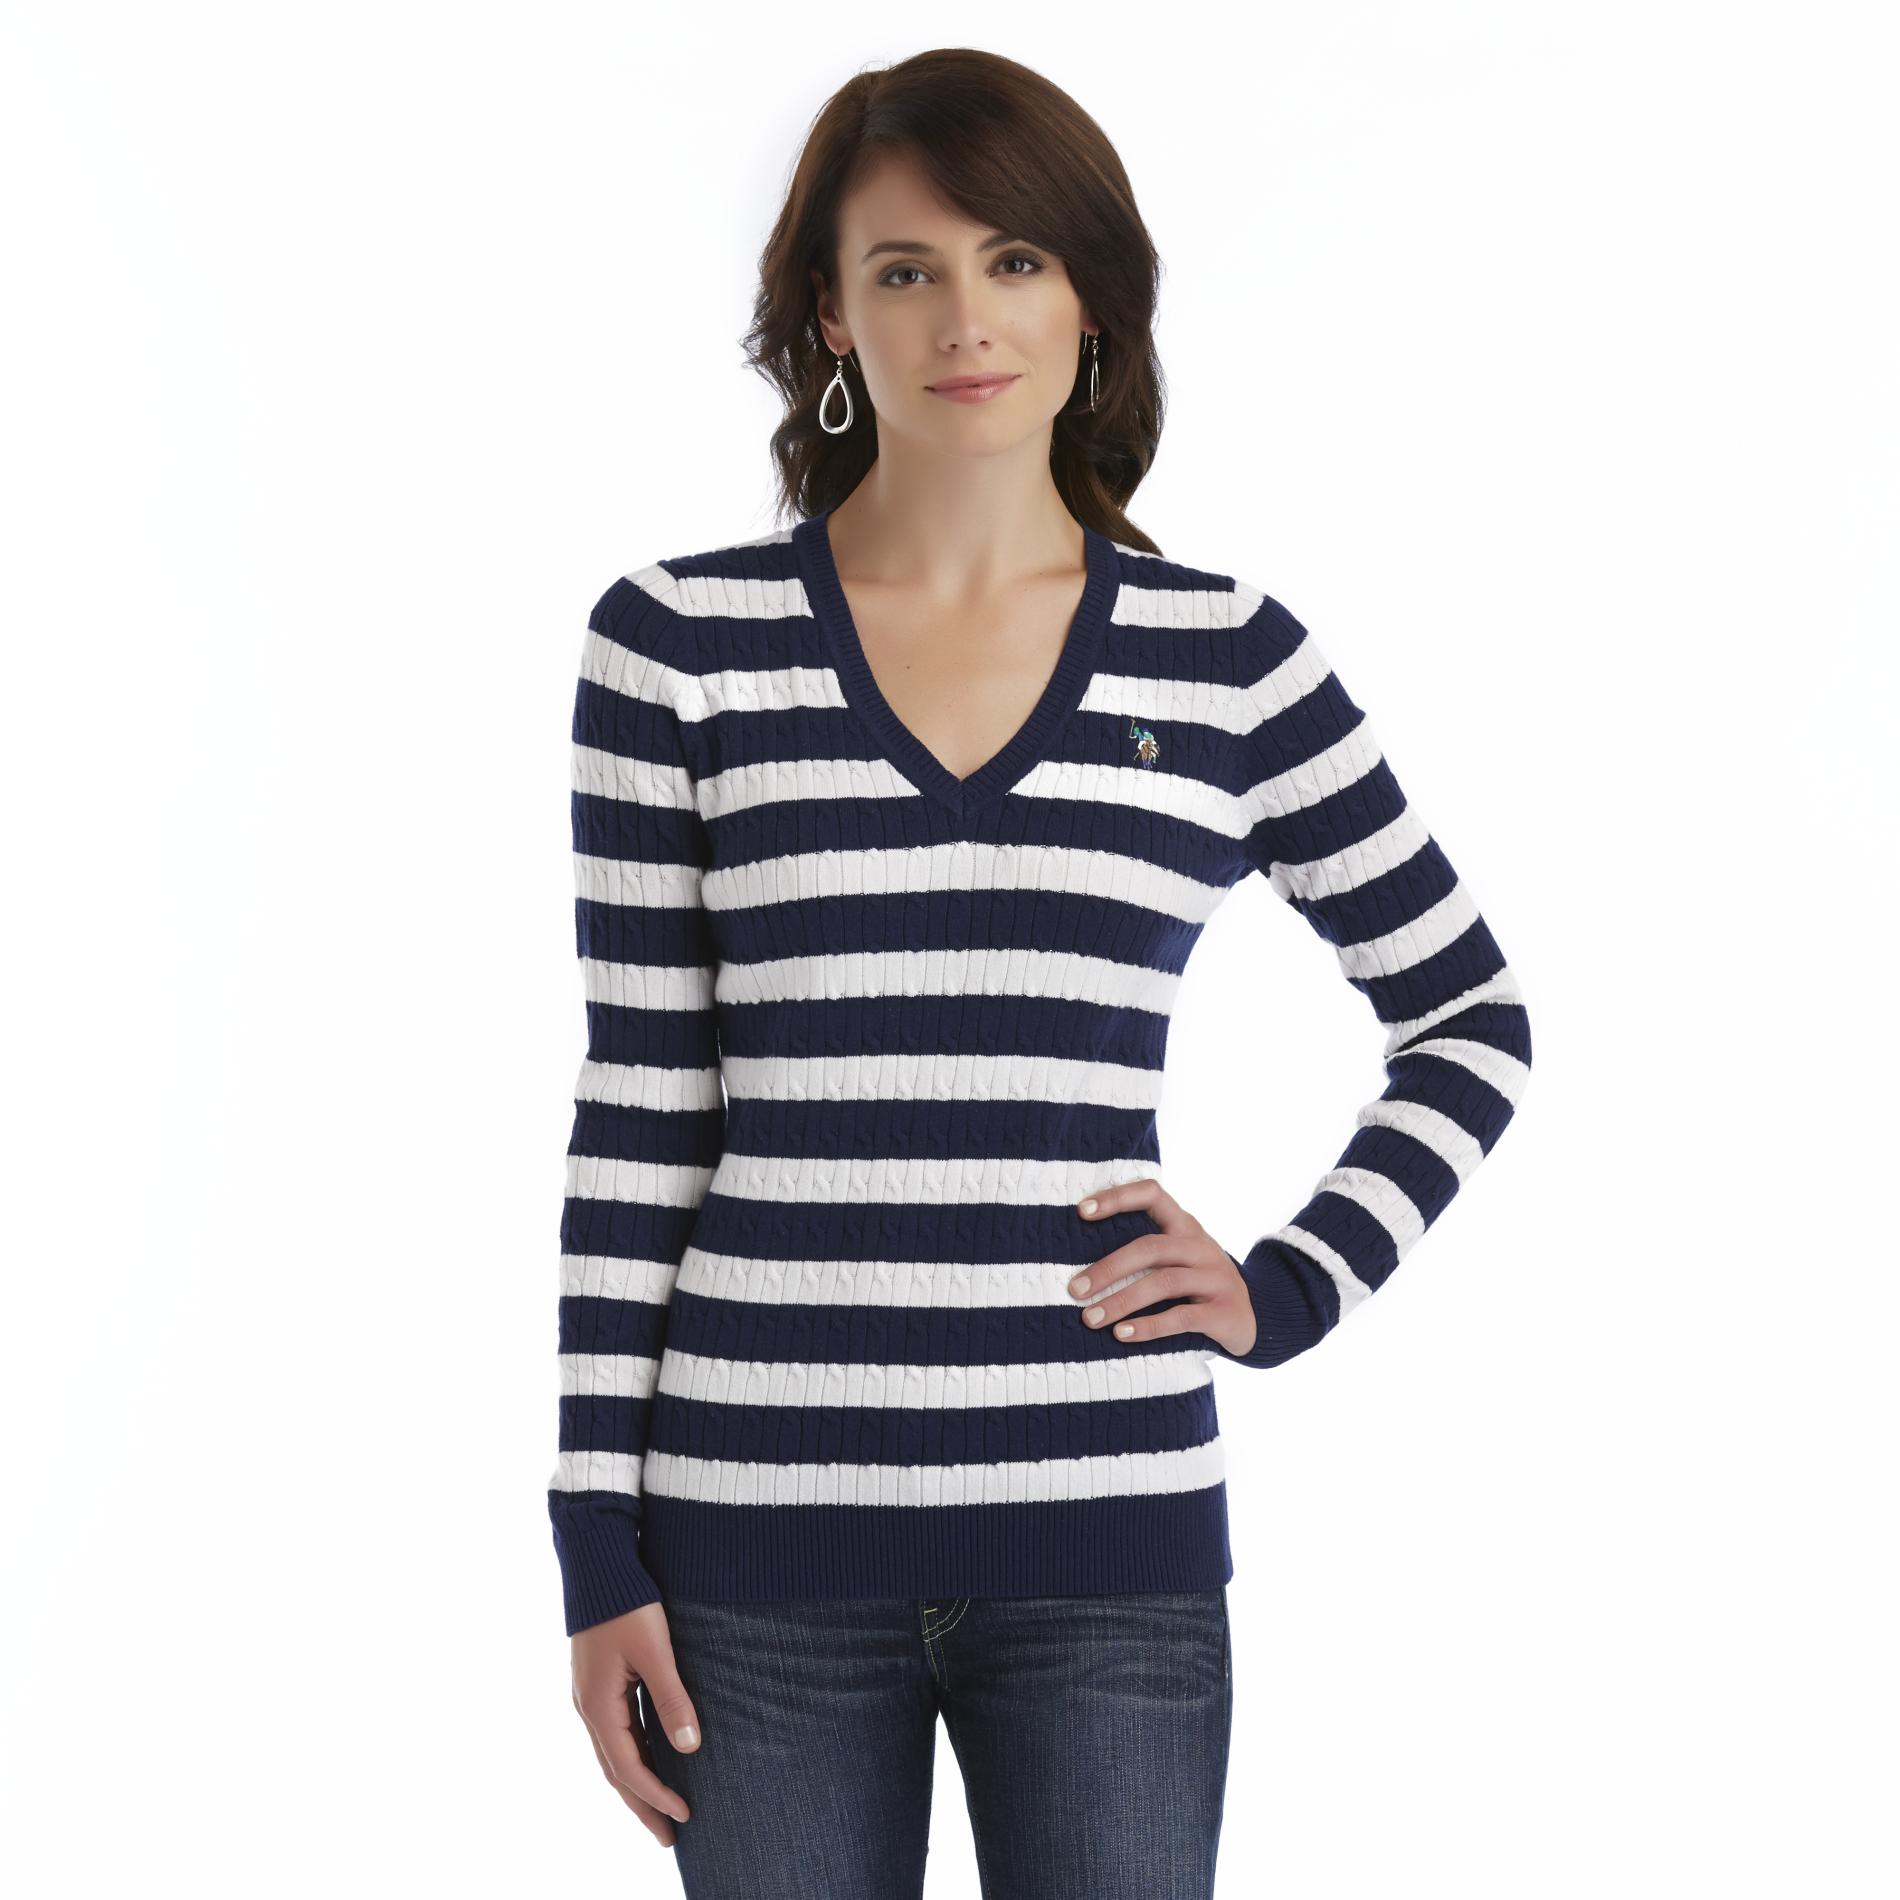 U.S. Polo Assn. Women's Cable Knit Sweater - Striped